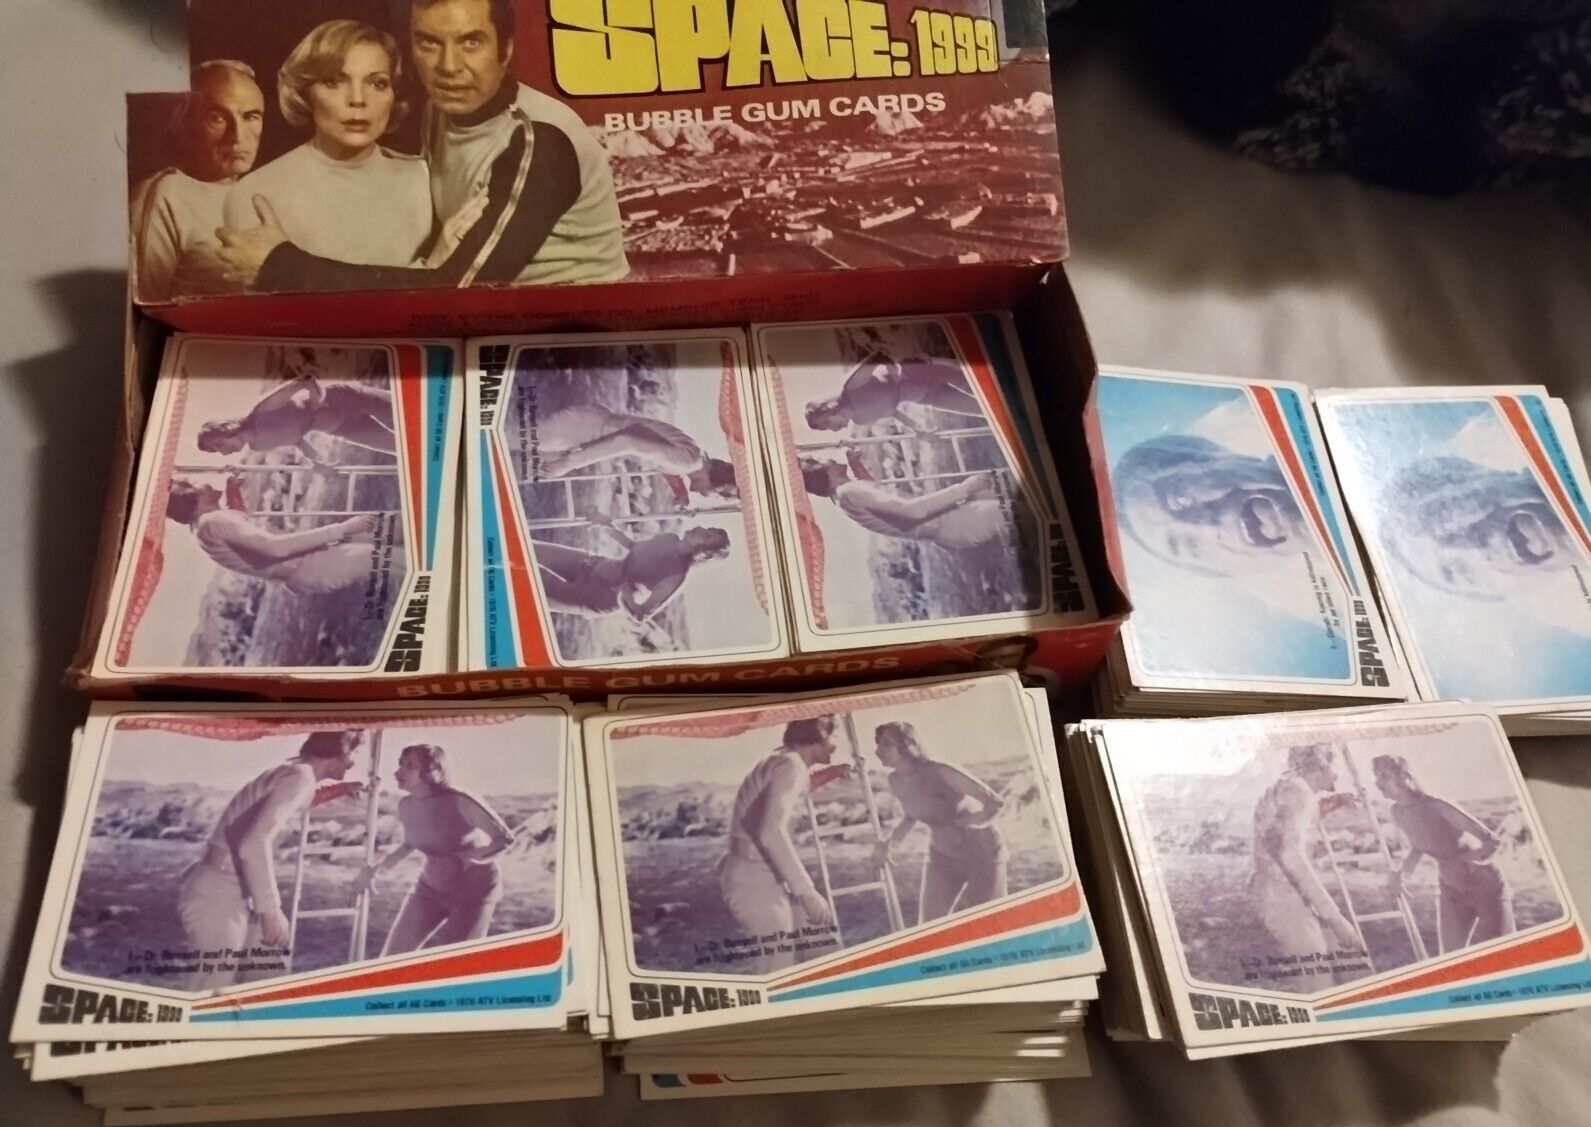 1976 Donruss Space 1999 Trading Cards Lot of 5 Sets 1-66 & Box + 3 Near Complete